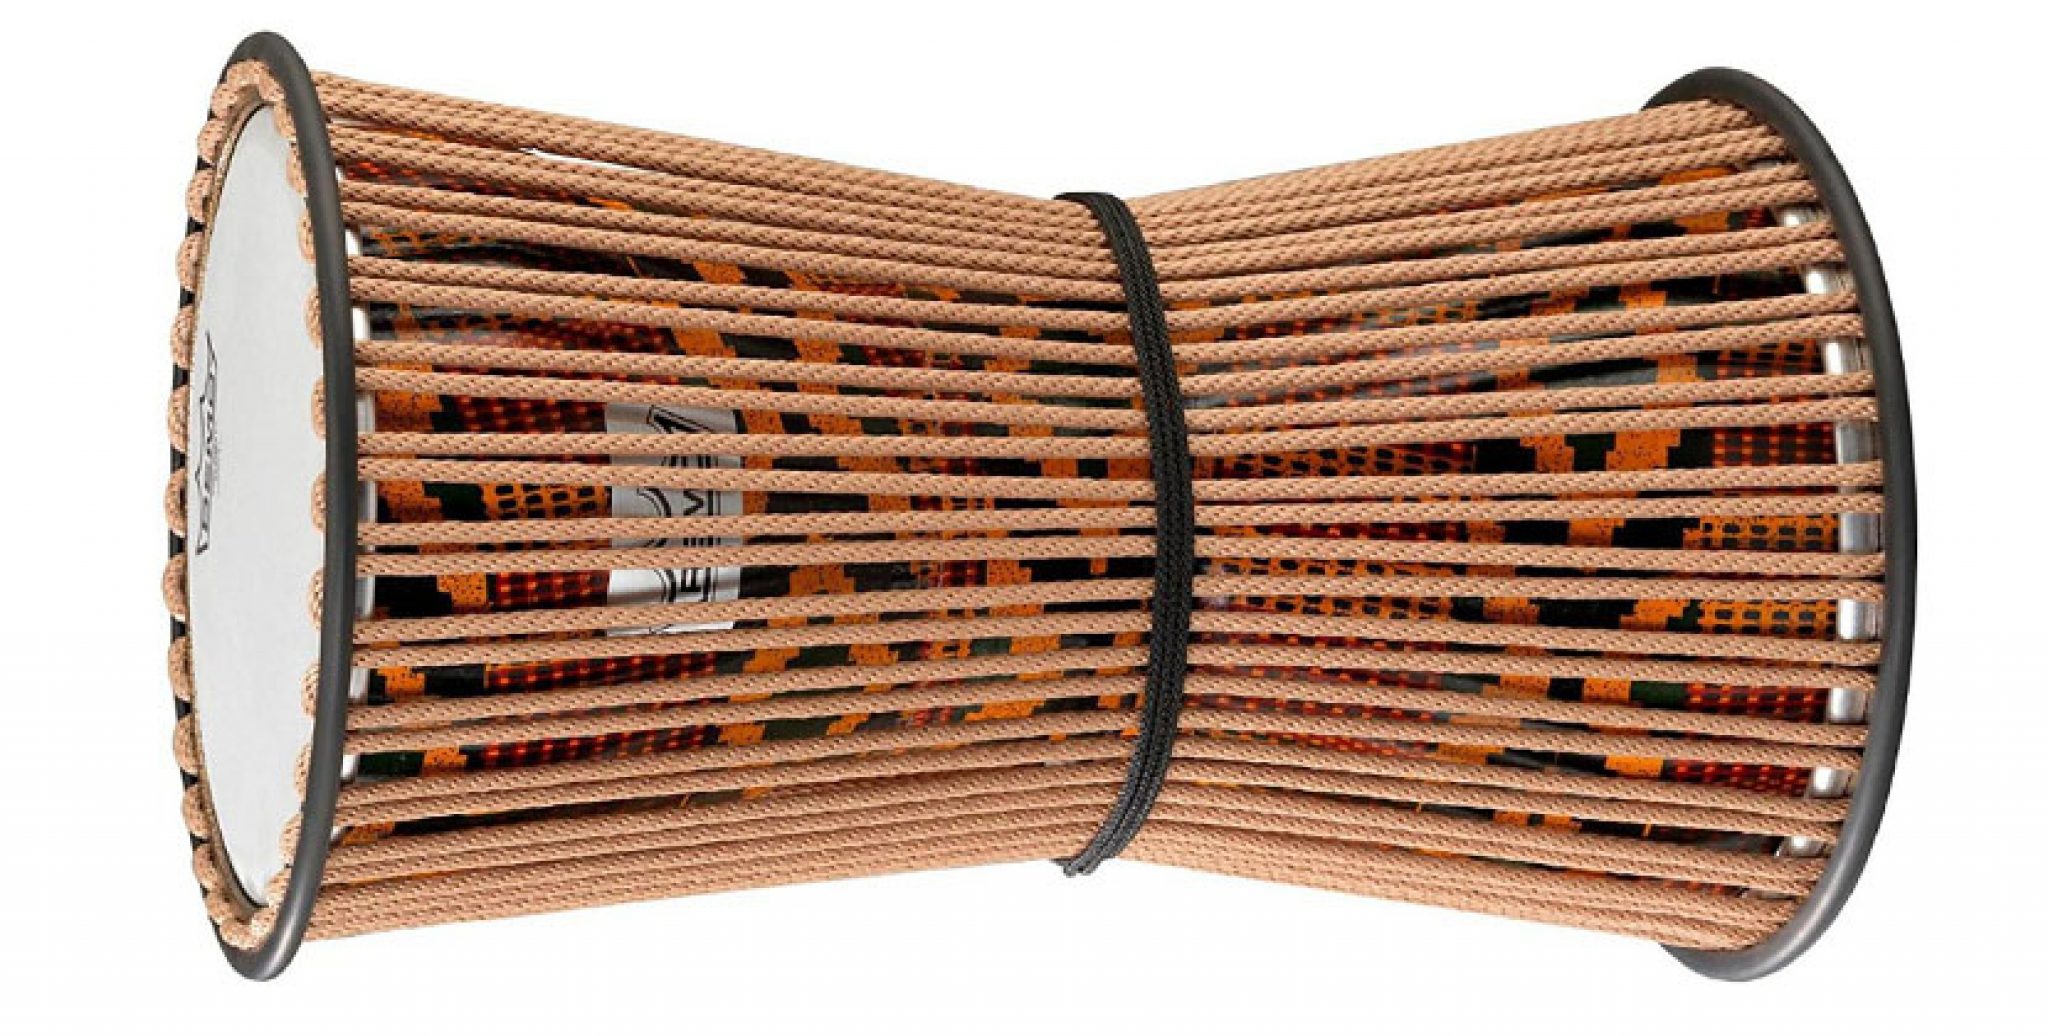 Remo Fabric African Stripe Talking Drum Review - Loud Beats